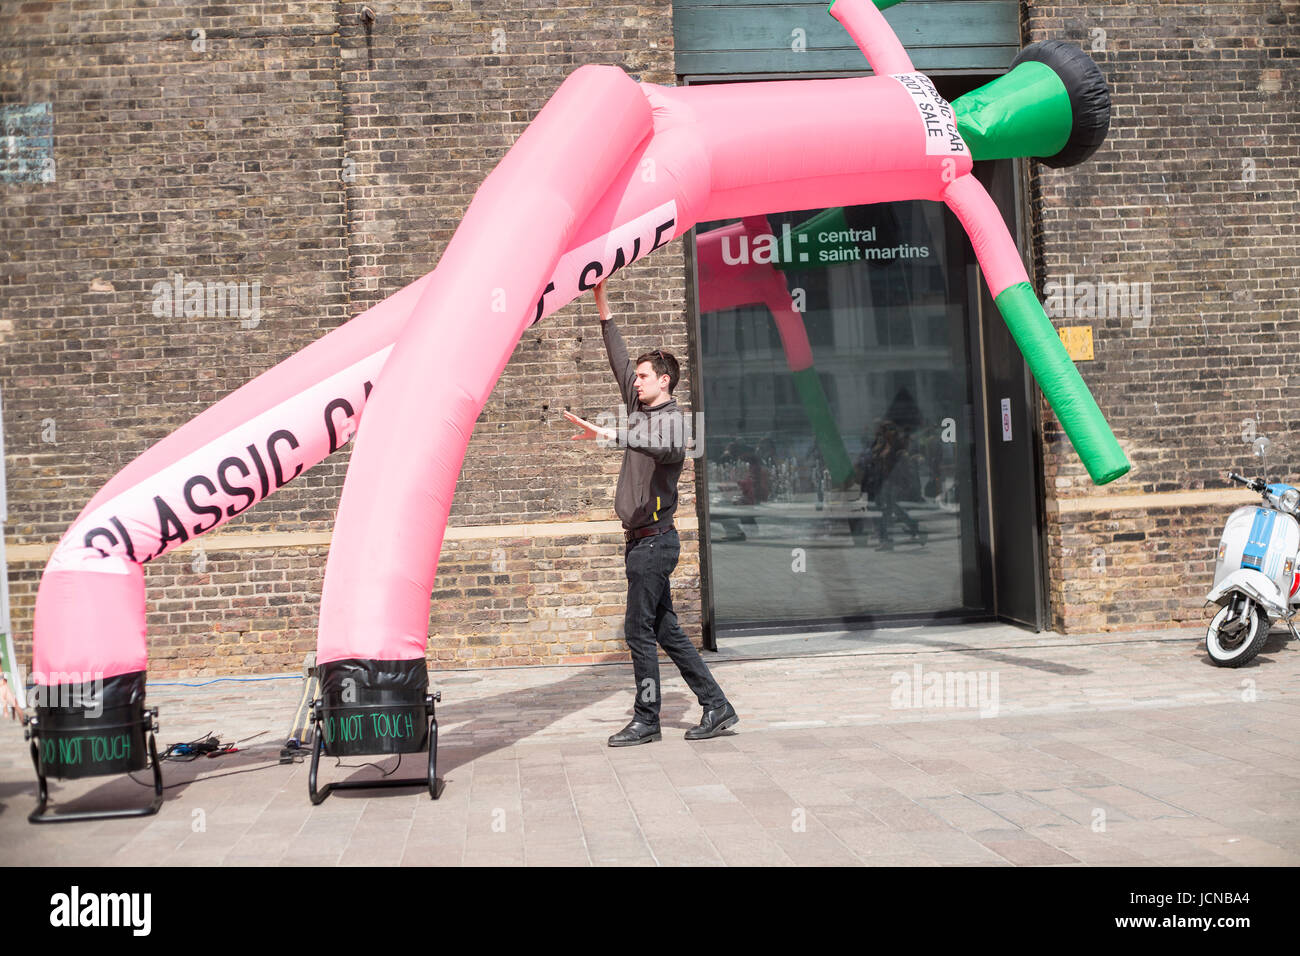 Man puts up inflatable at event Stock Photo